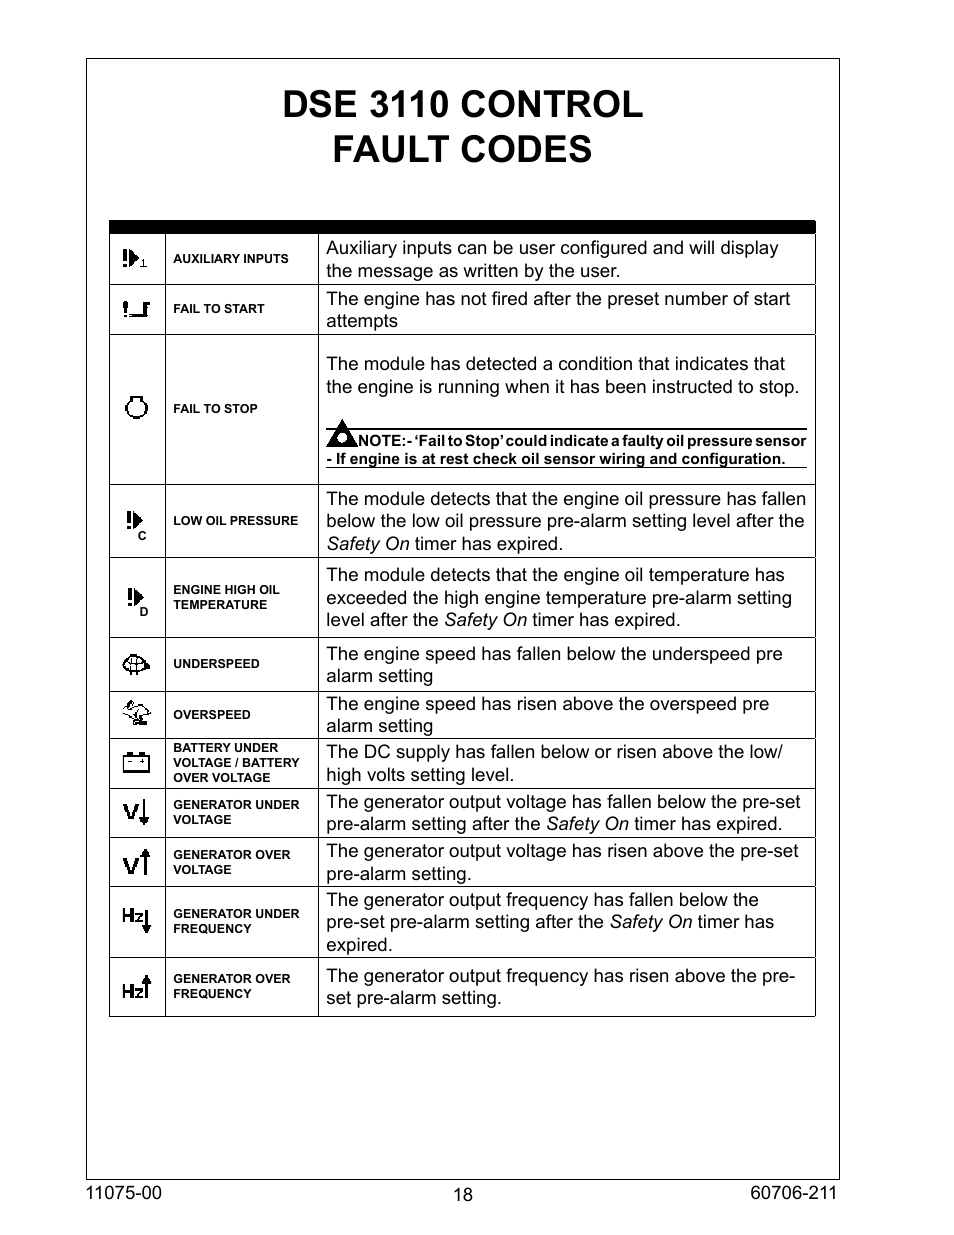 Dse 3110 control fault codes | Winco ULPSS8B2W/E User Manual | Page 18 / 24